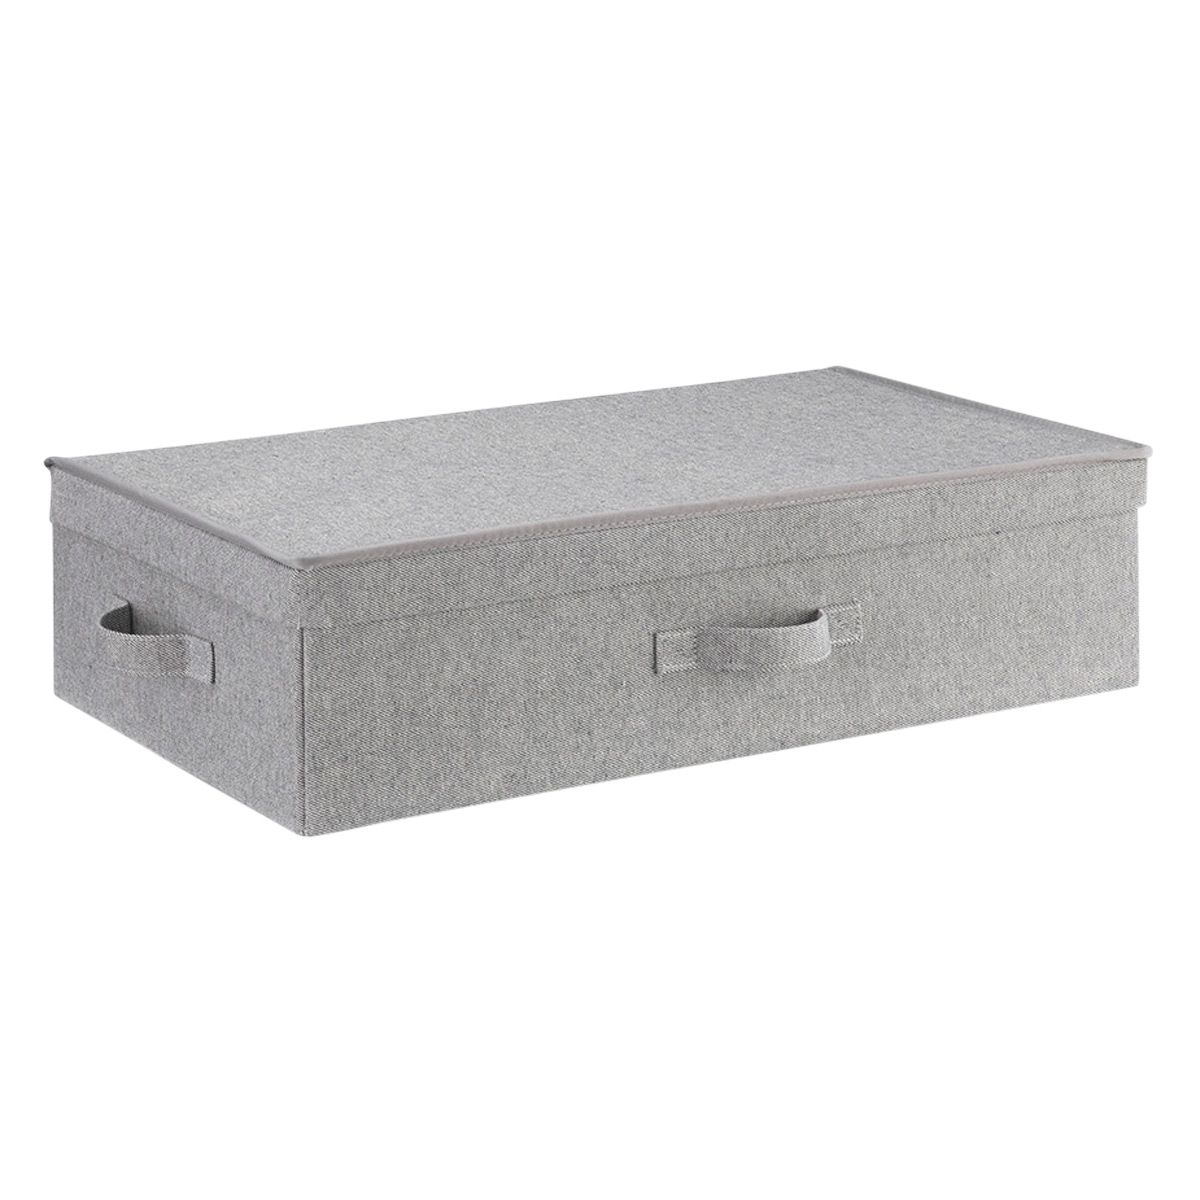 Fabric Under Bed Box | The Container Store